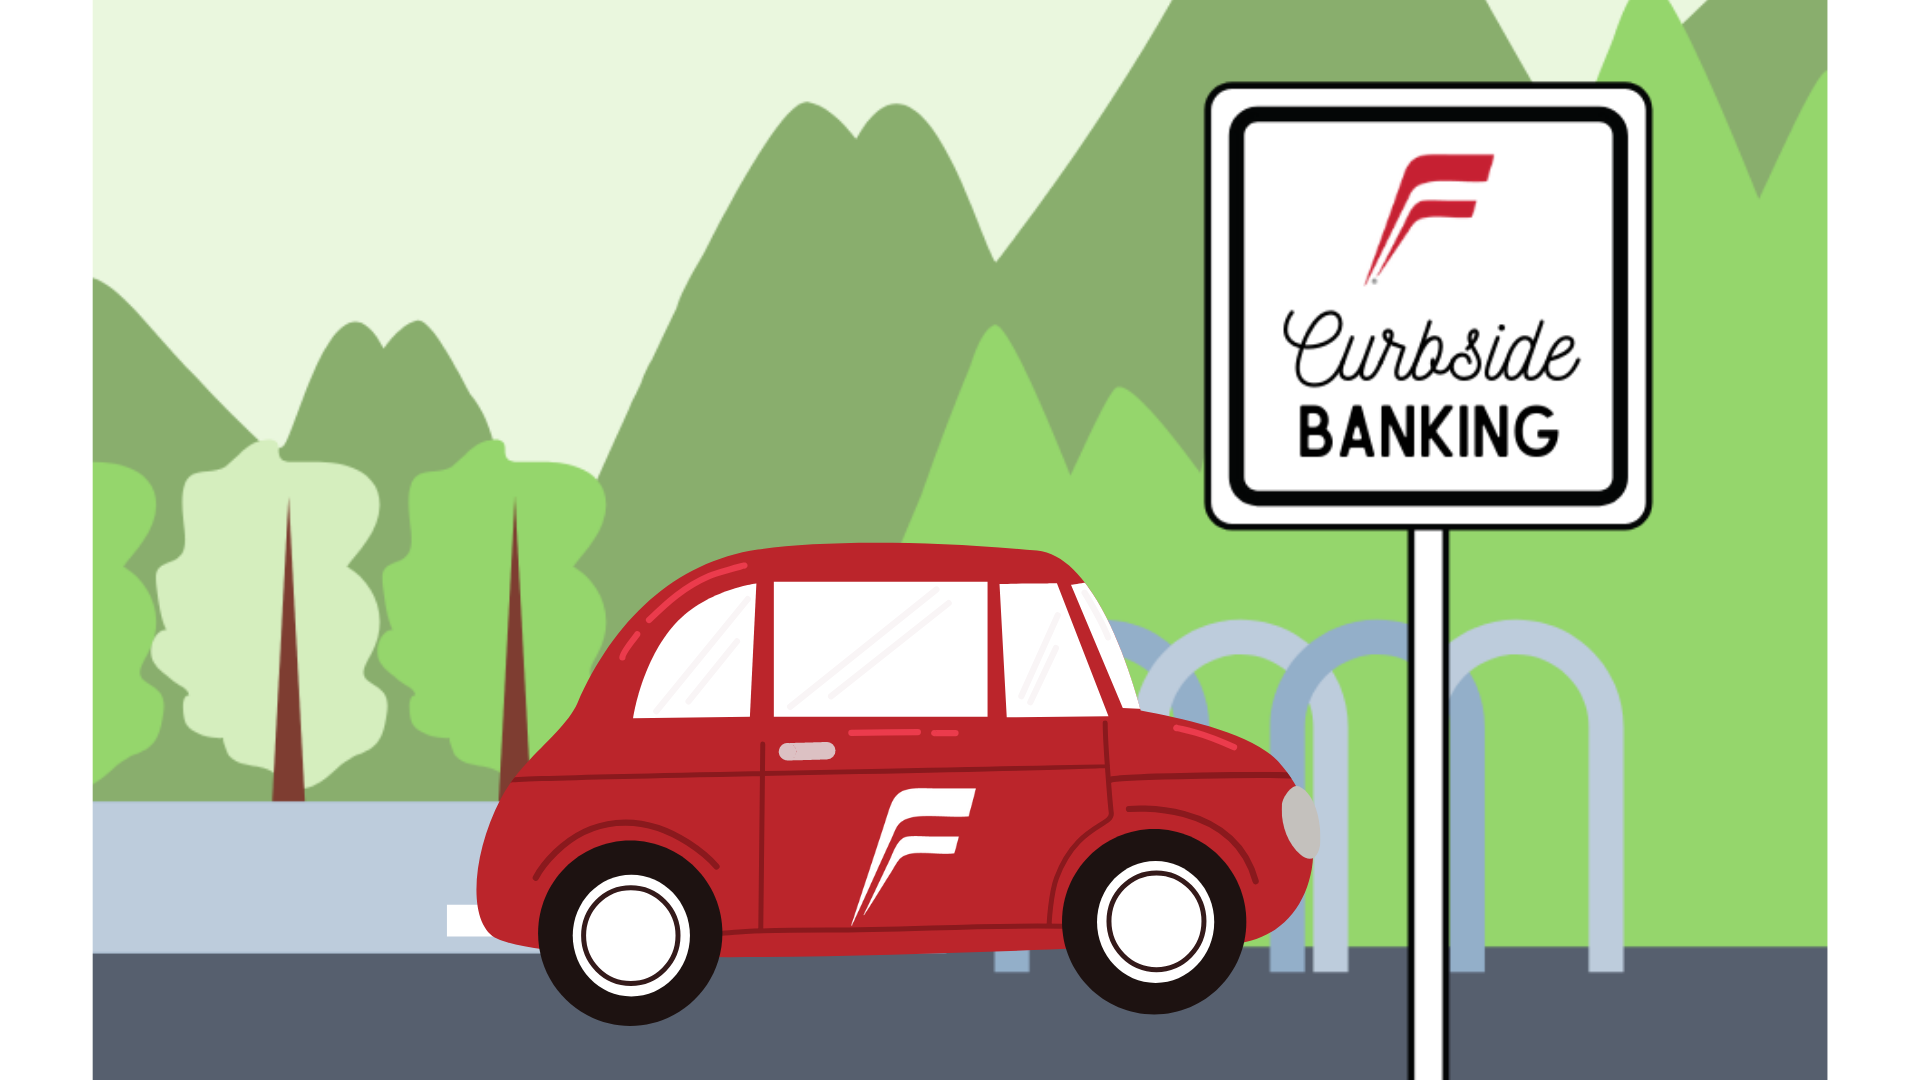 Curbside banking graphic